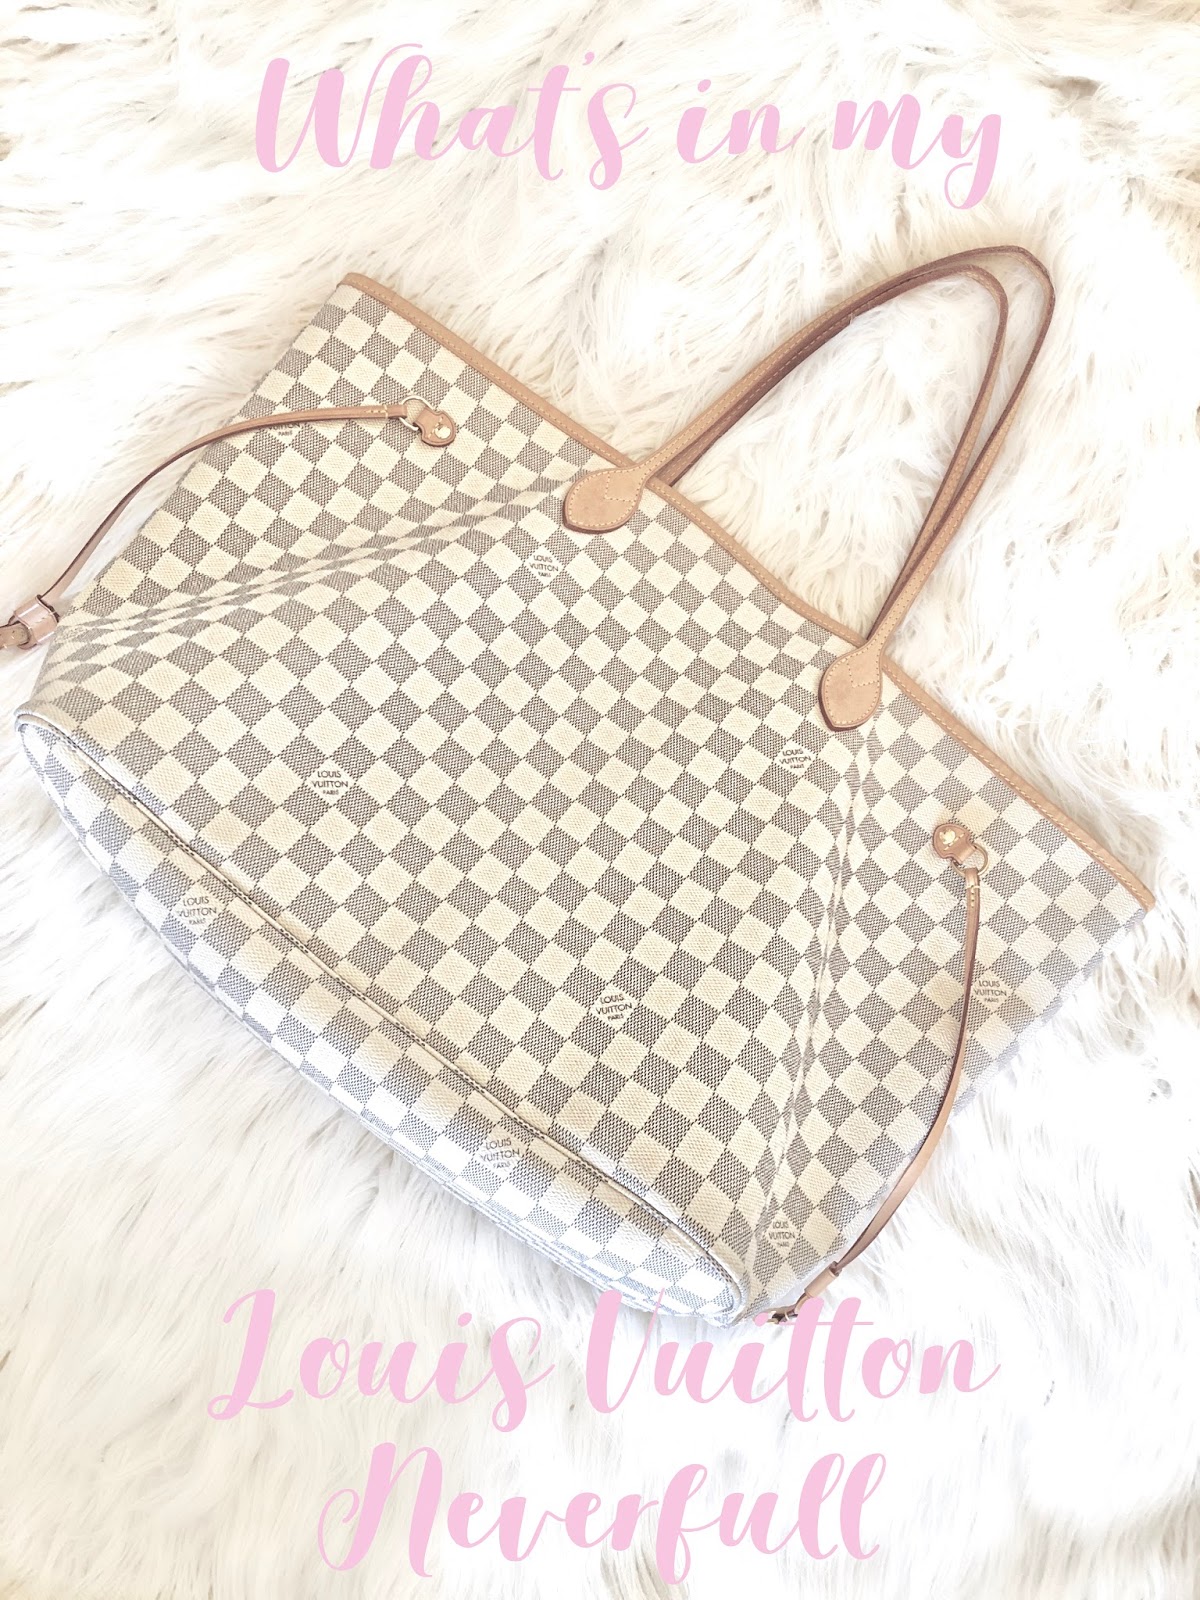 Louis Vuitton Neverfull MM Review + What's Inside 